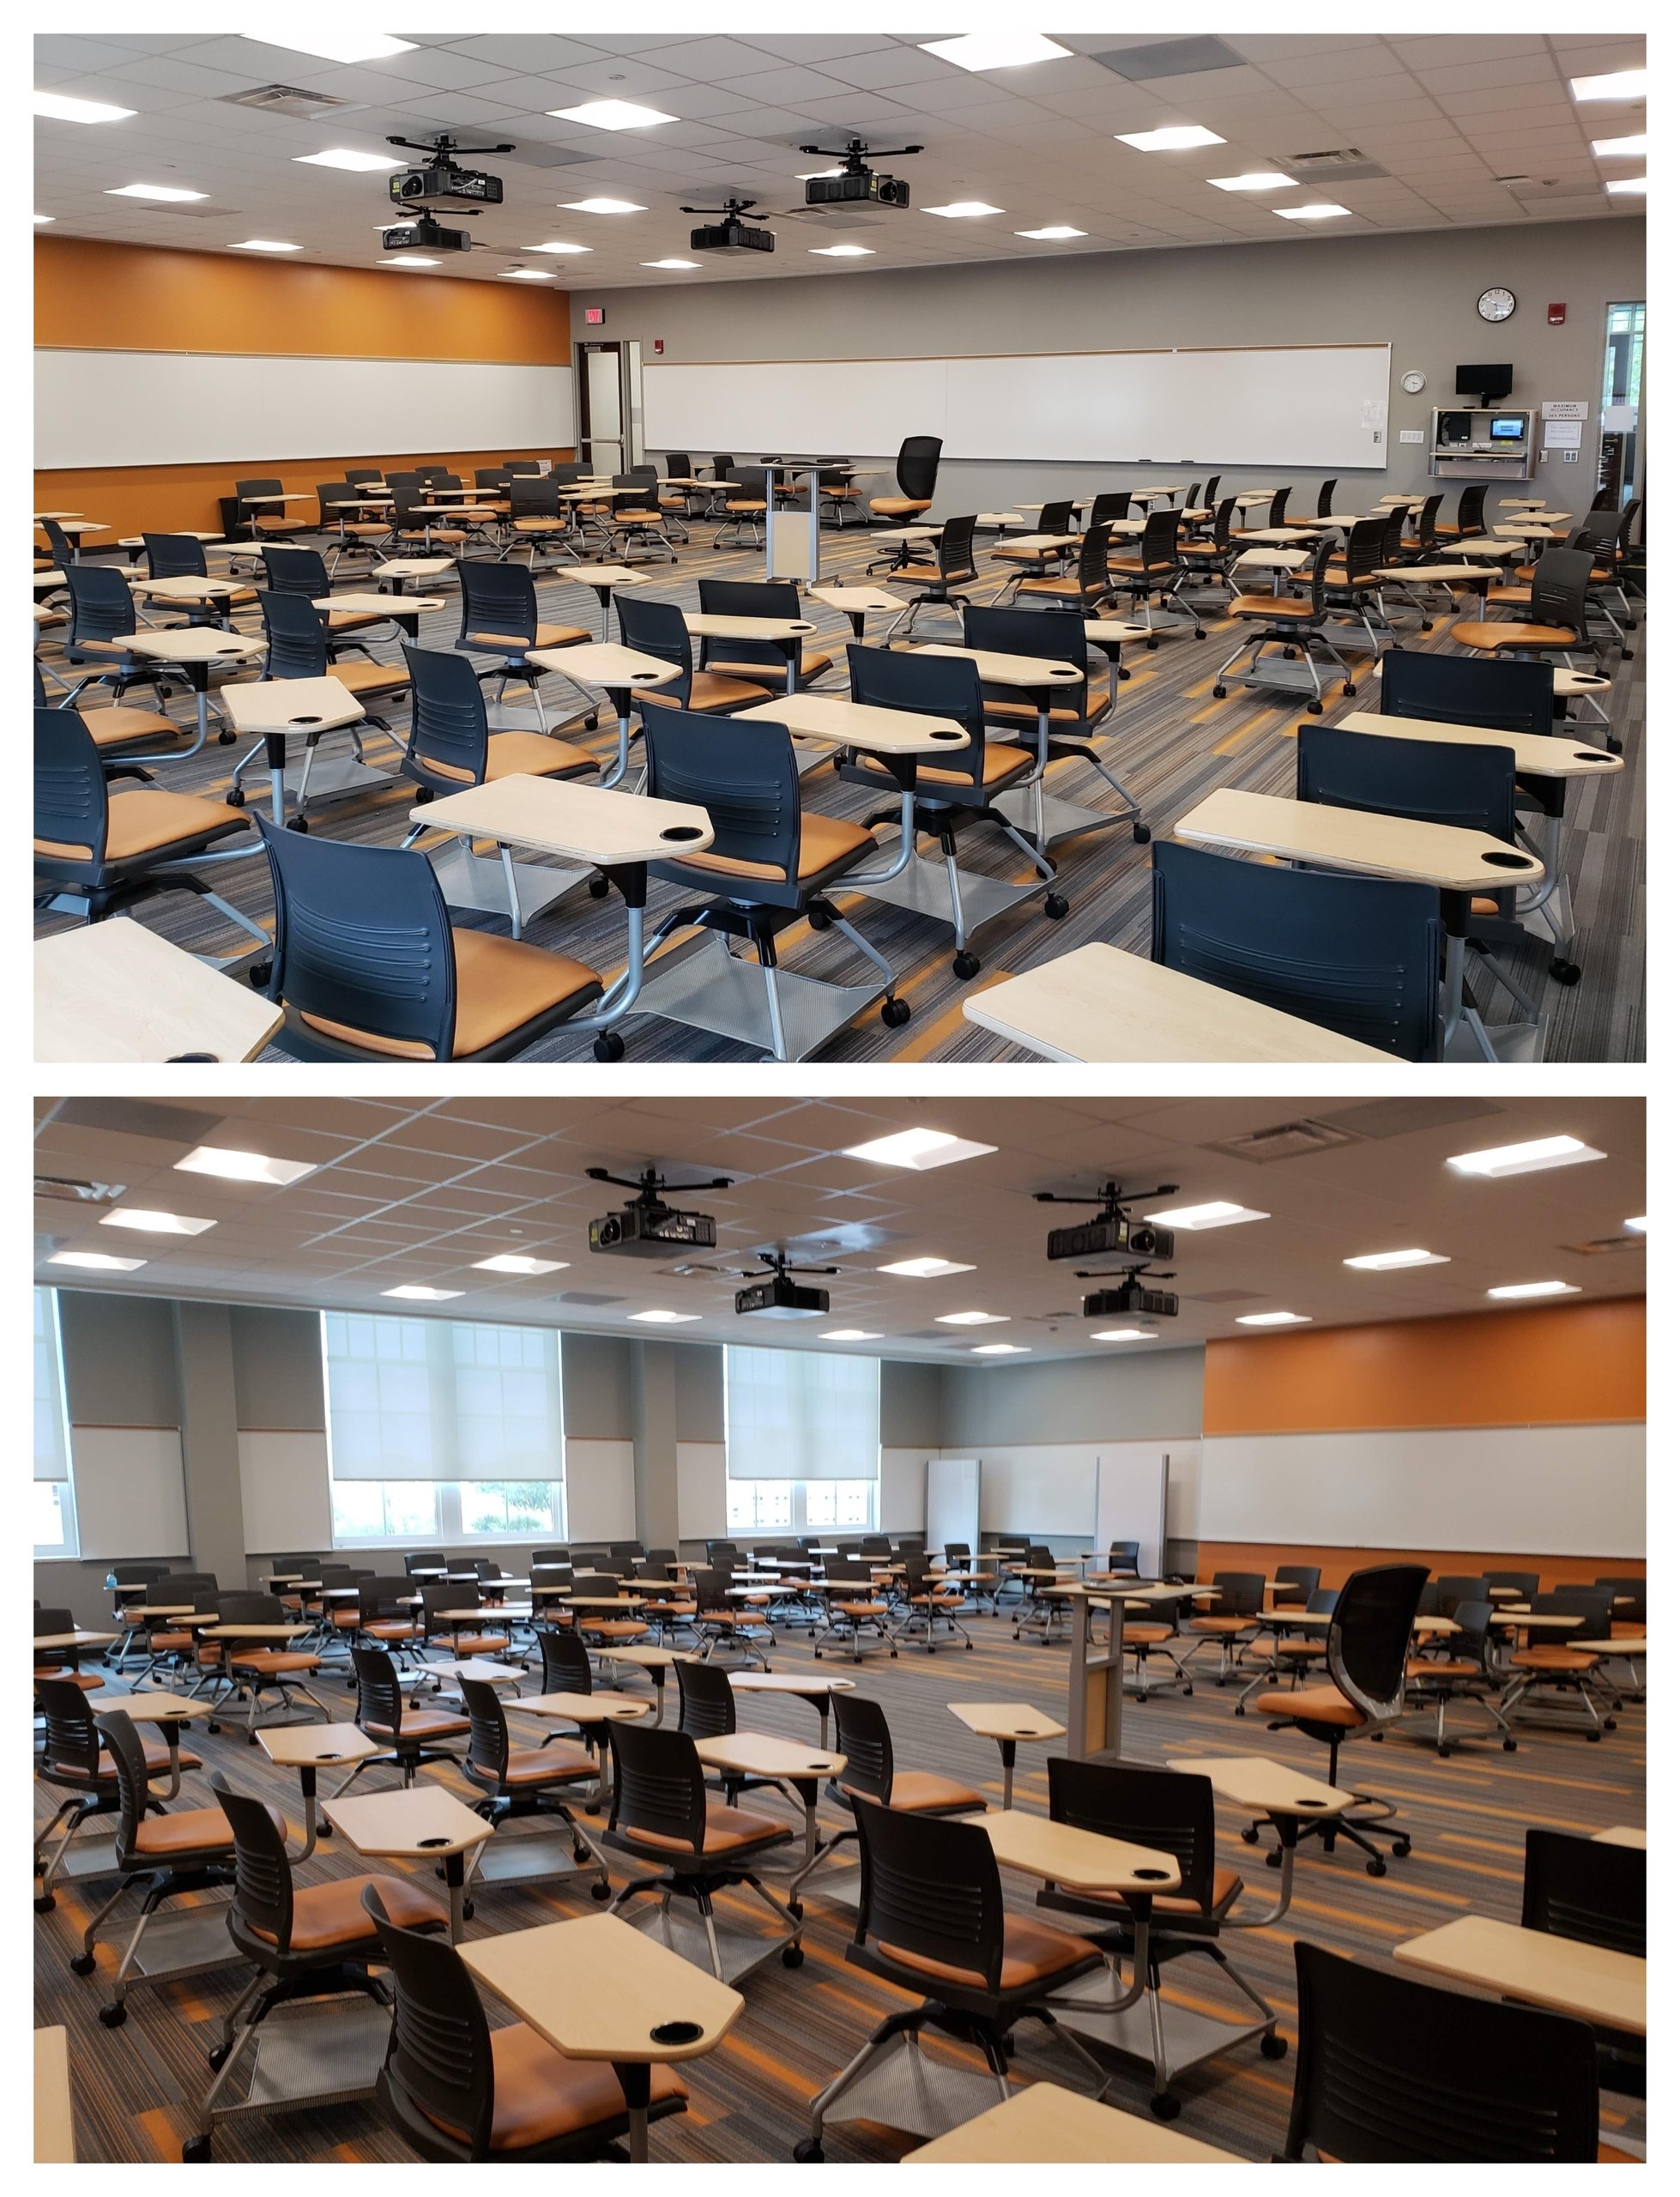 University Room 307 Front & Back View 